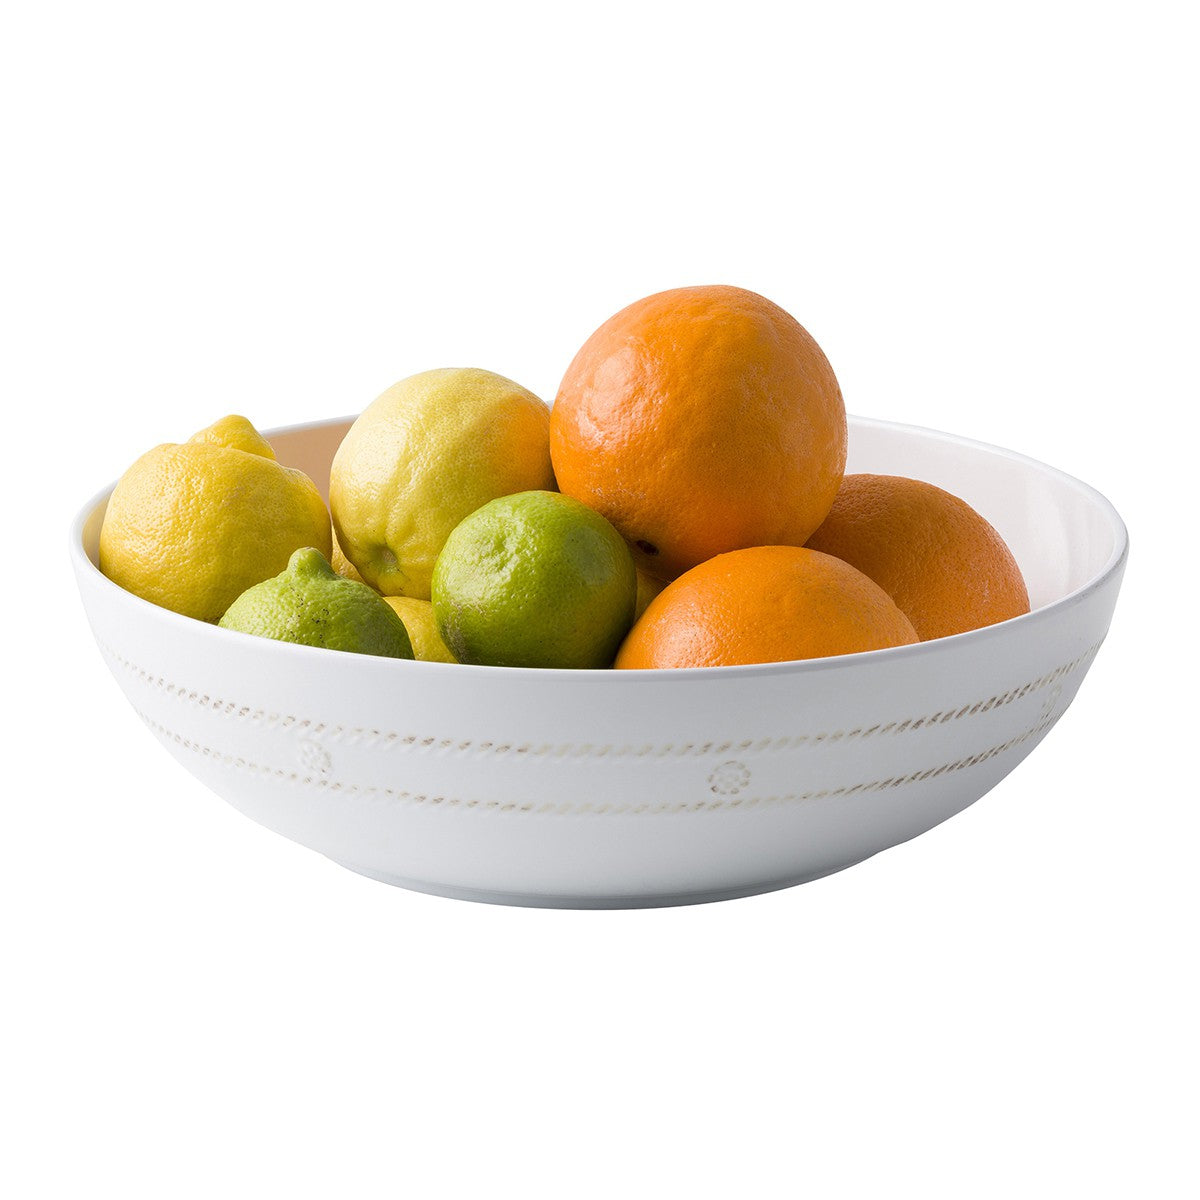 berry and thread large melamine serving bowl displayed with lemons and oranges on a white background